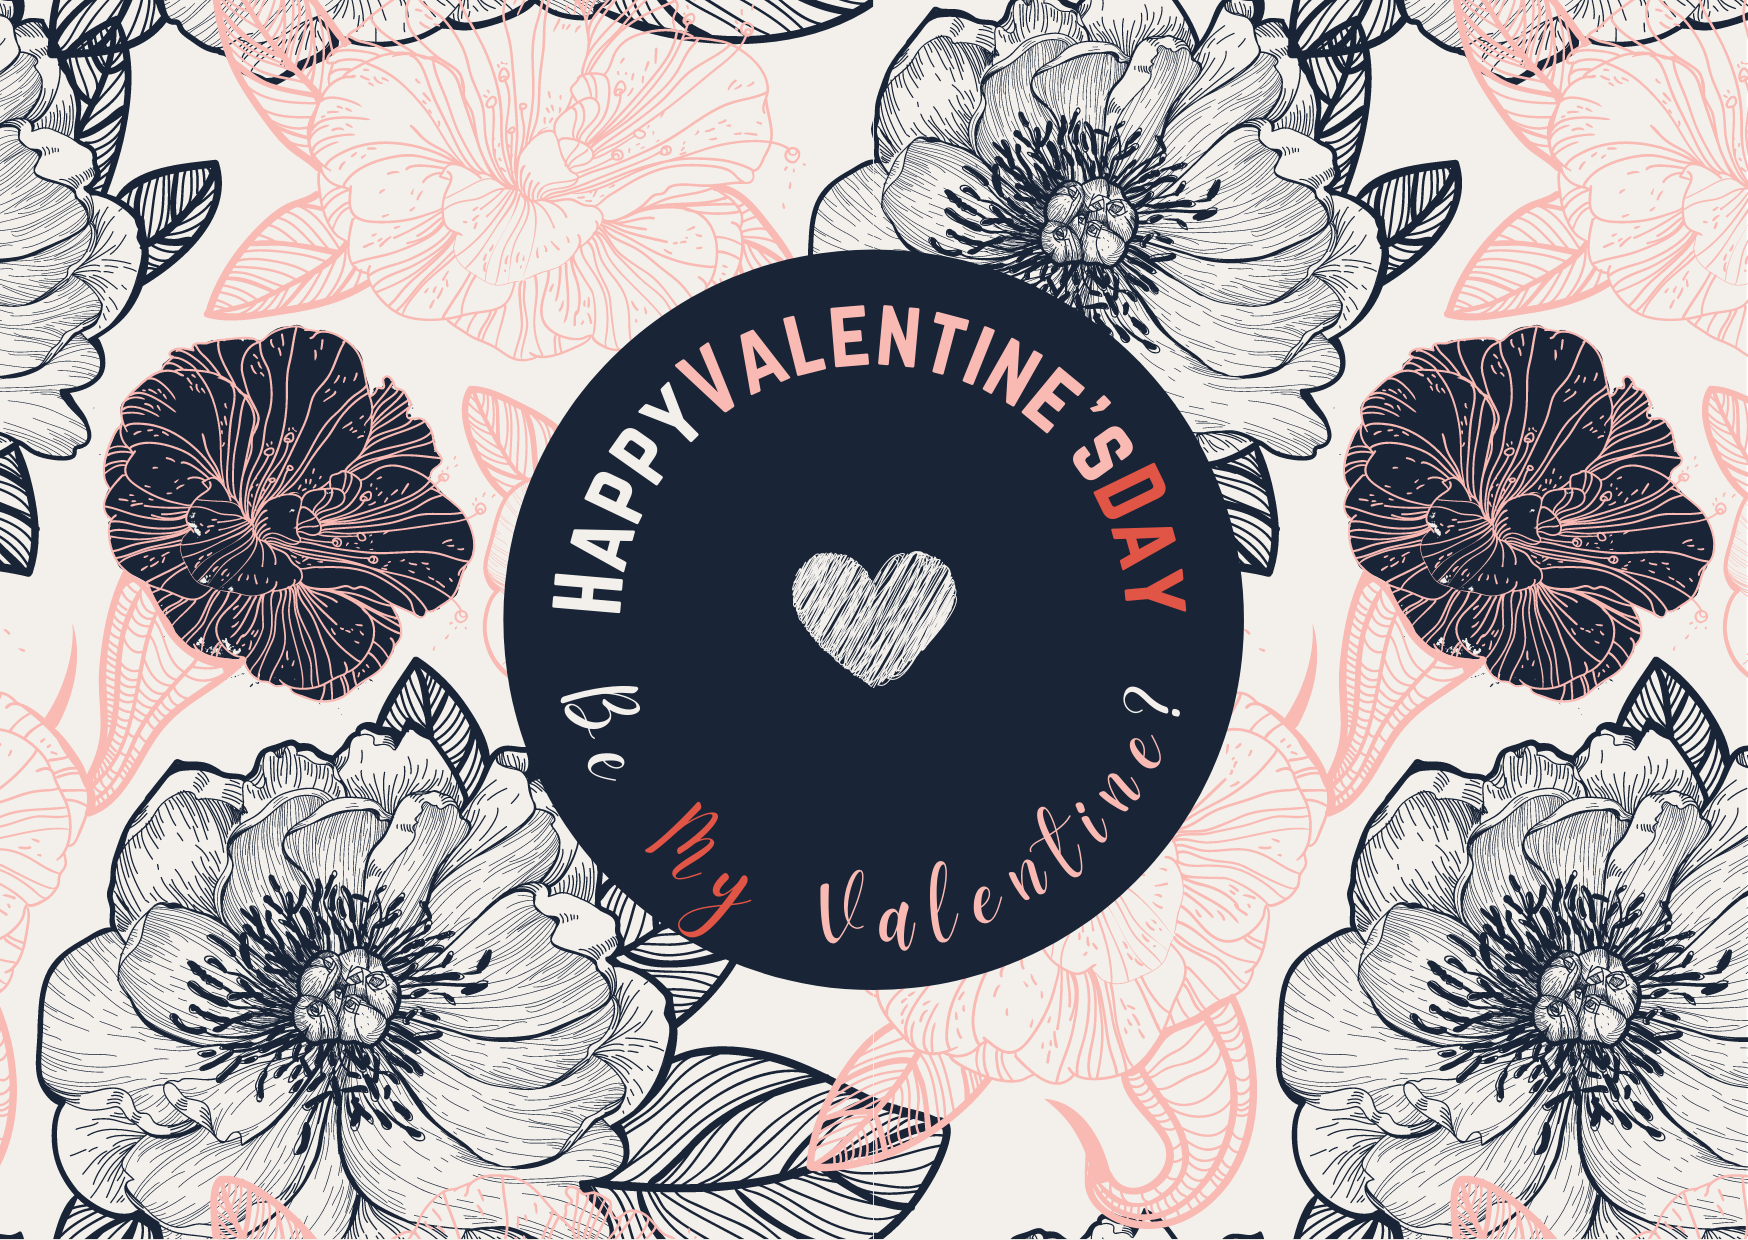 Canva Template for Valentine’s Day.